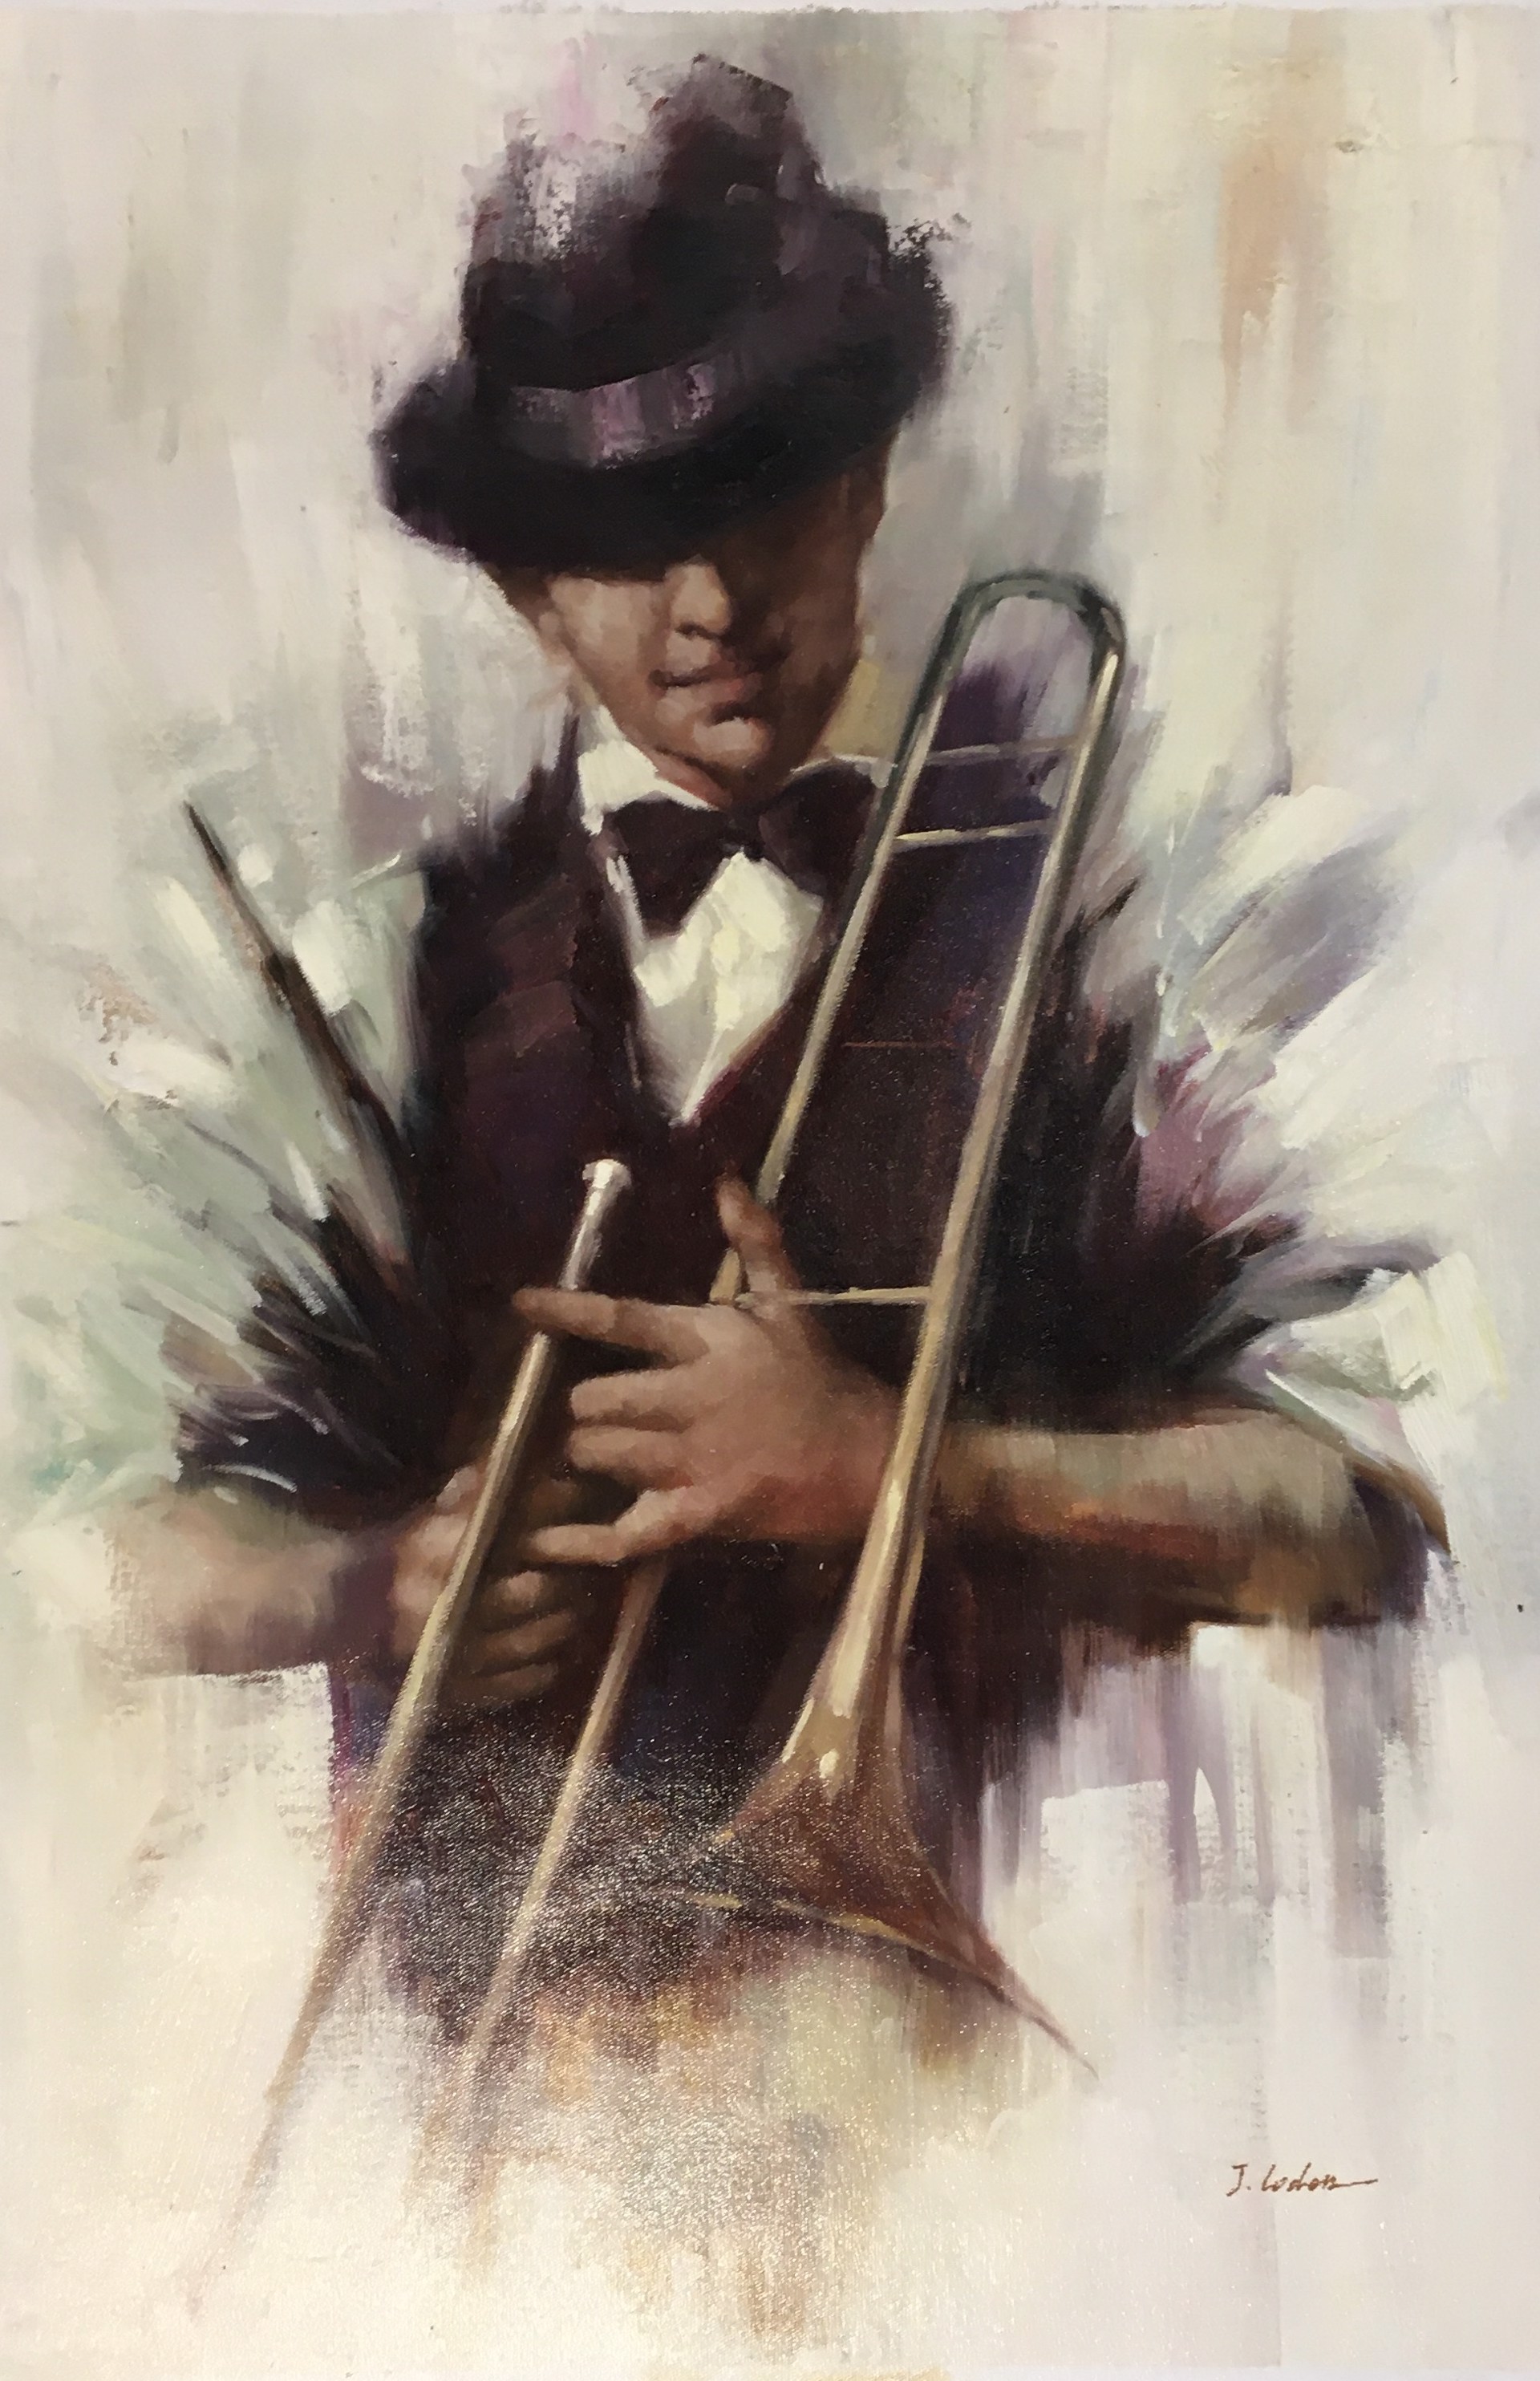 TROMBONE PLAYER by LODEN